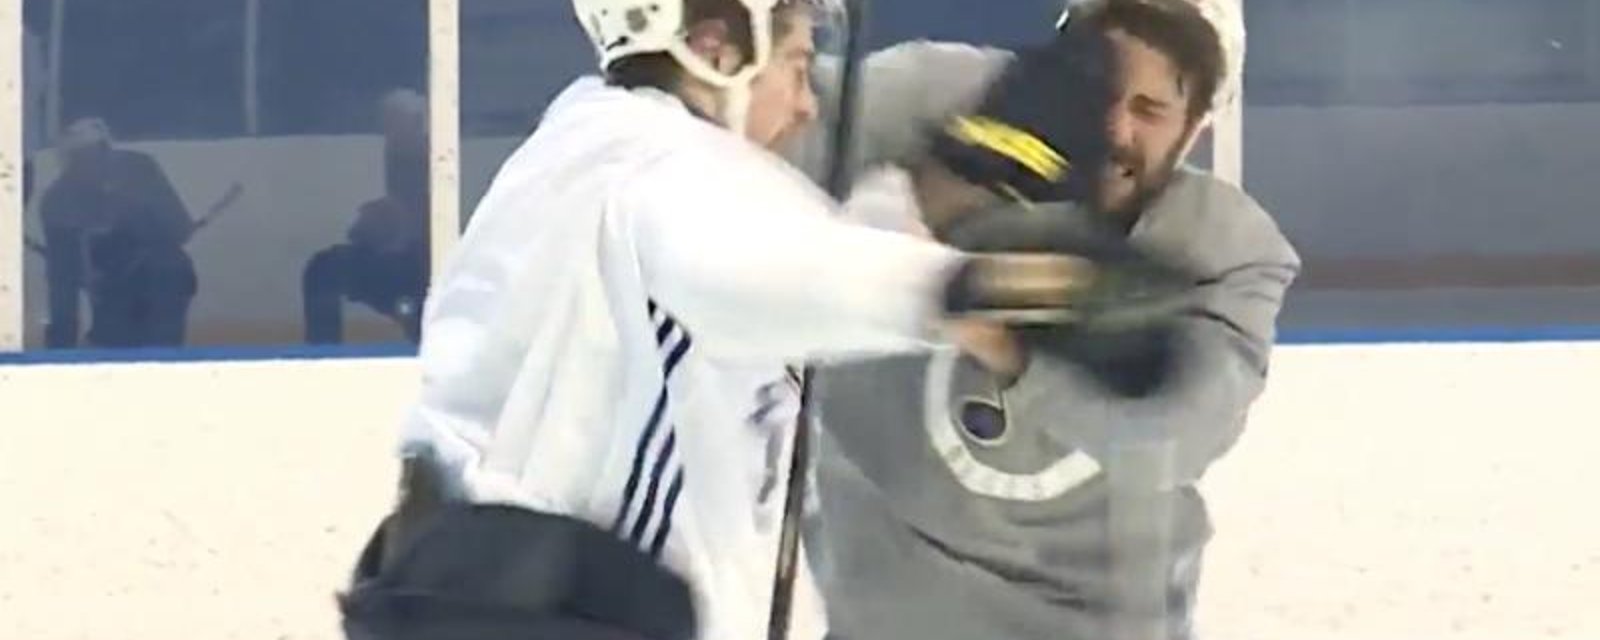 Trade rumors reach a peak after fight breaks out between teammates in St. Louis 